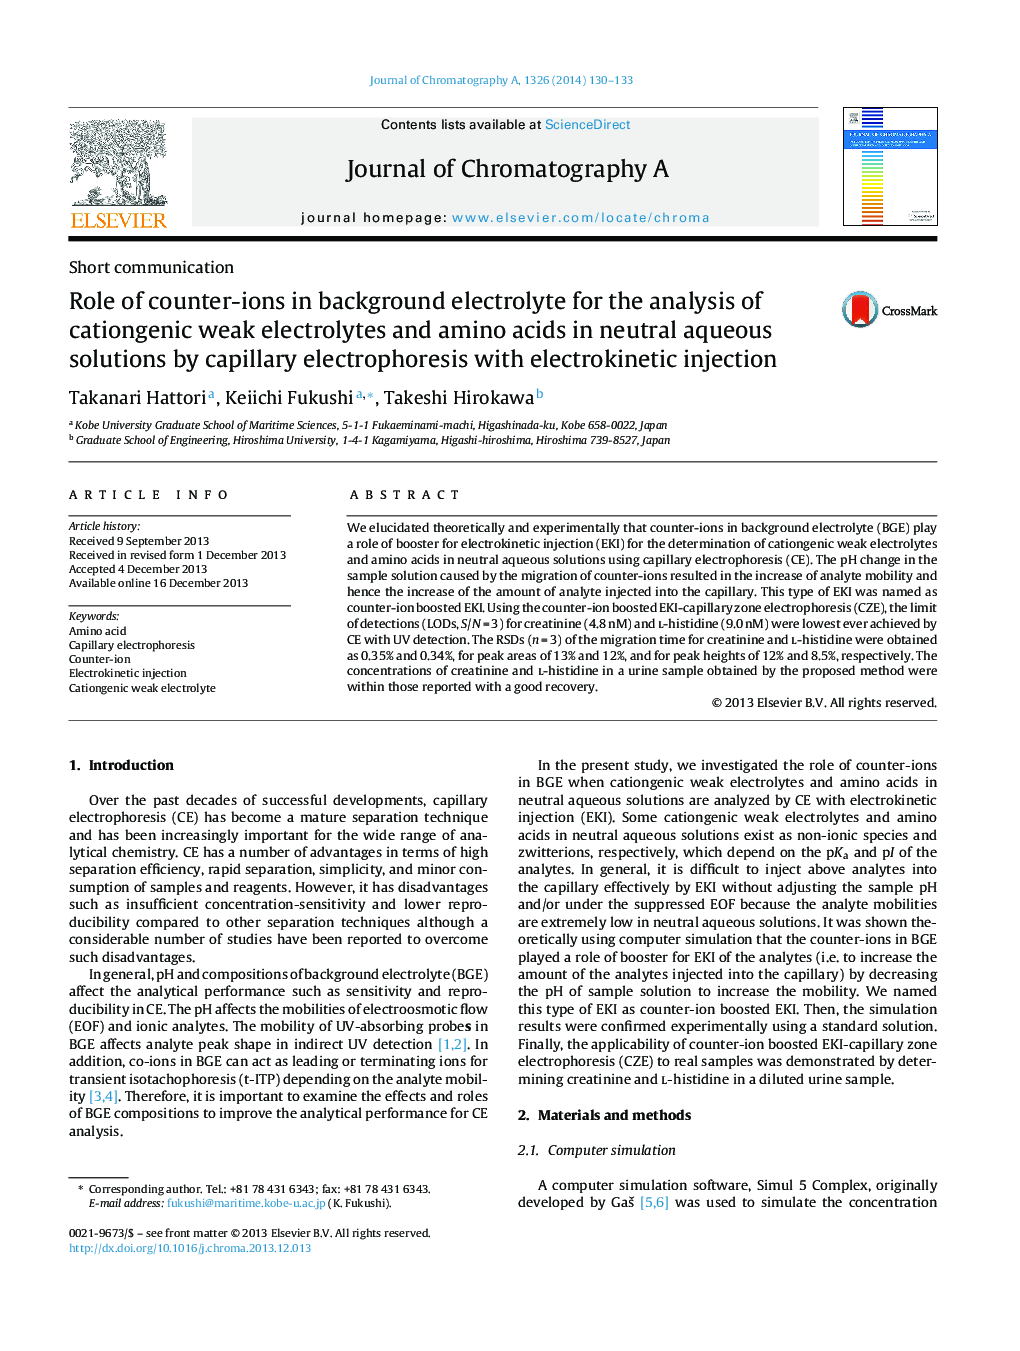 Role of counter-ions in background electrolyte for the analysis of cationgenic weak electrolytes and amino acids in neutral aqueous solutions by capillary electrophoresis with electrokinetic injection